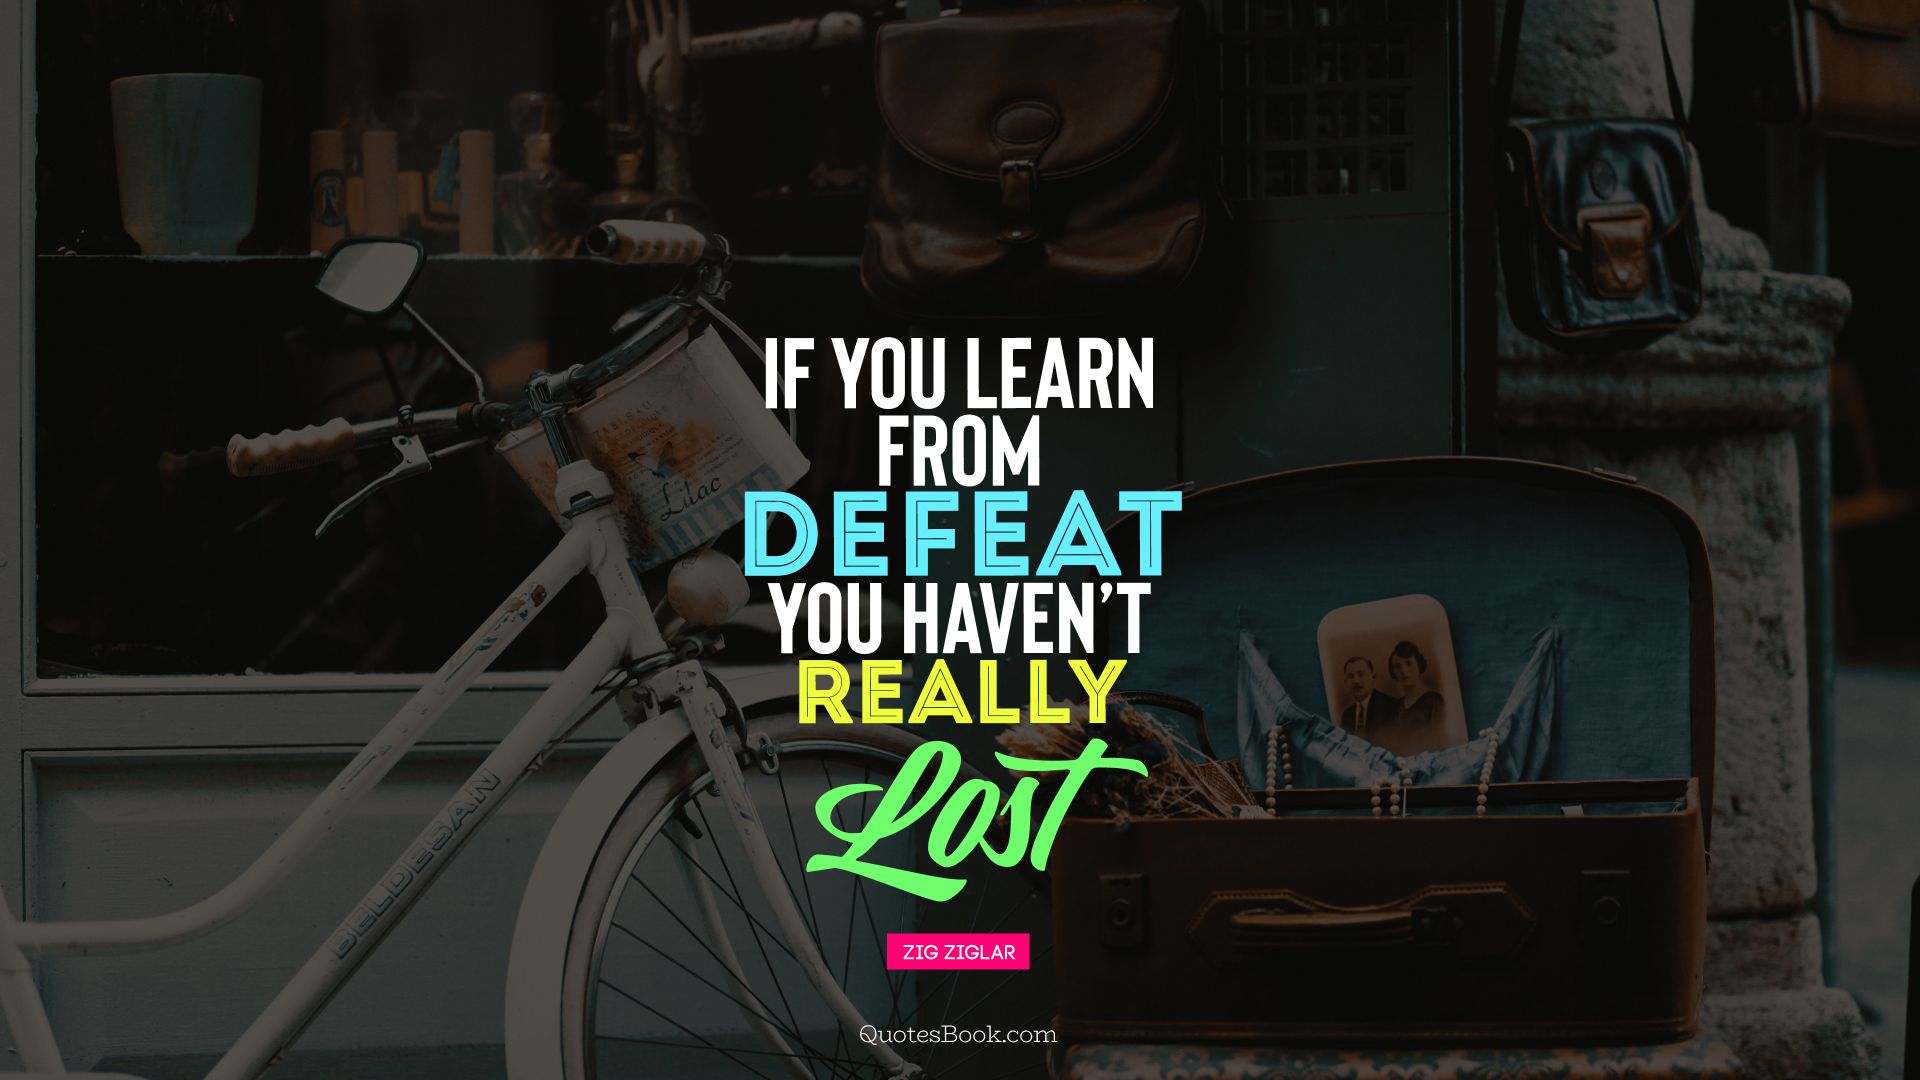 If you learn from defeat toy haven't really lost. - Quote by Zig Ziglar